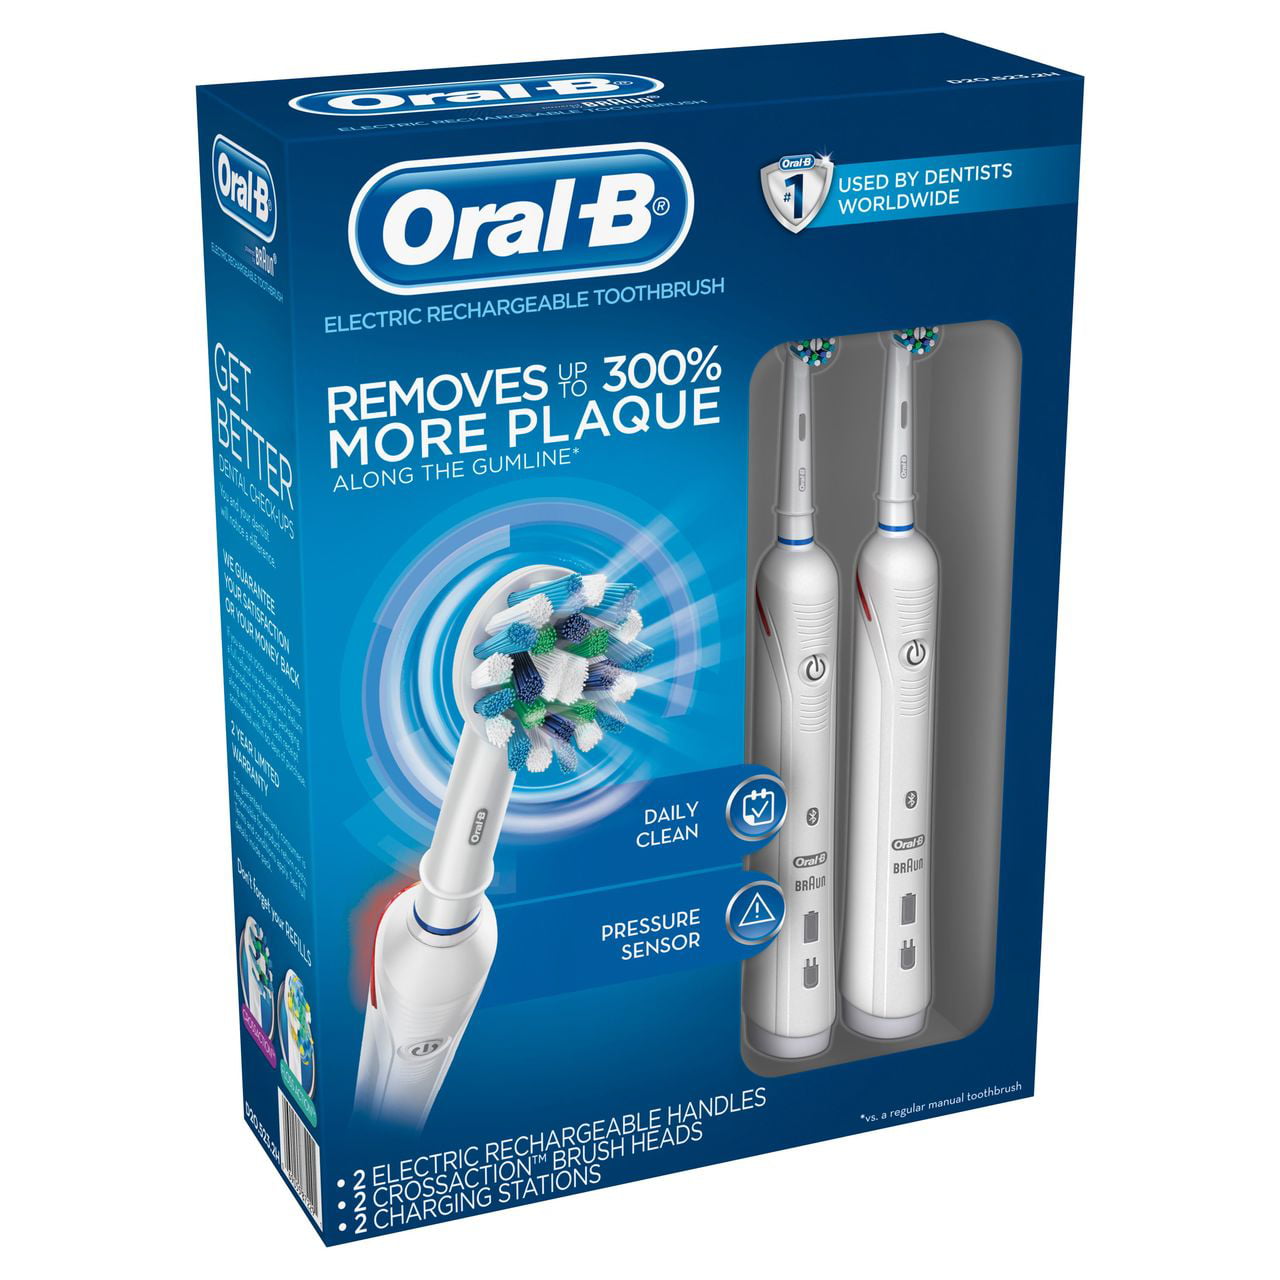 Pennenvriend ondersteboven Lunch Oral-B Cross Action Power Brush 2 Pack. - Walmart.com